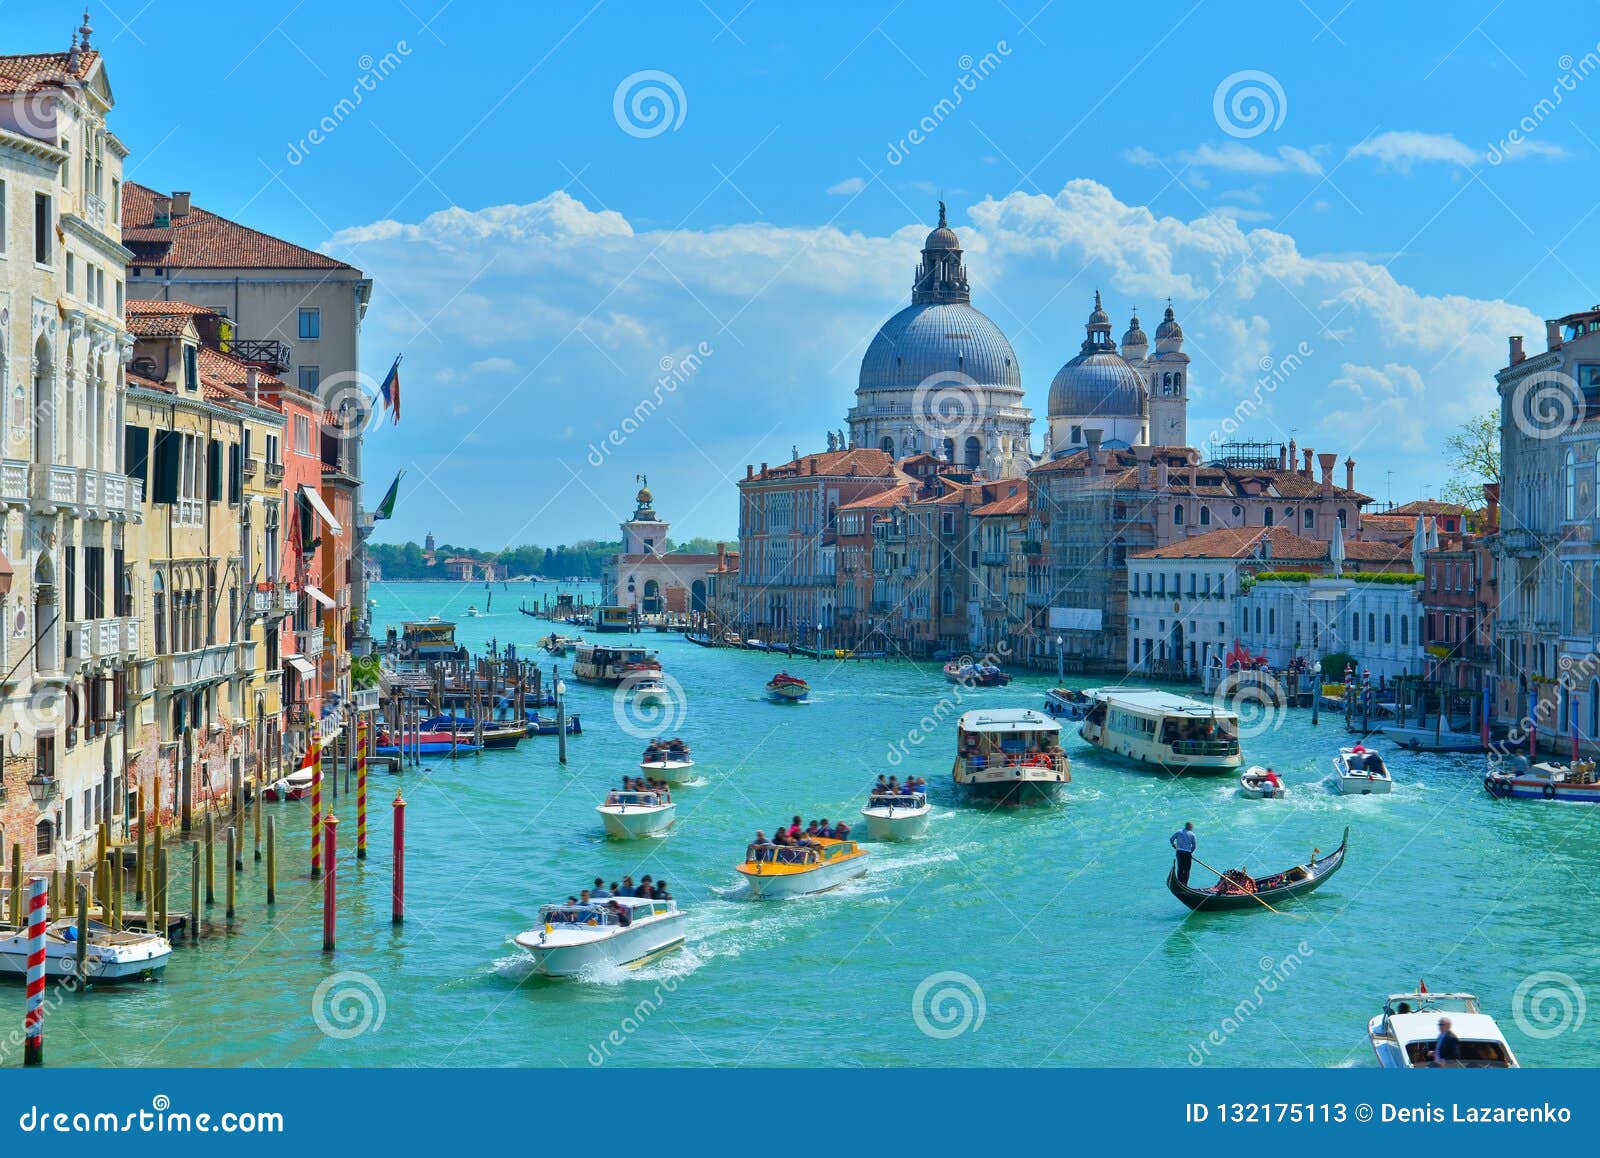 Landscape Of Spring Grand Canal Venice Italy Stock Image Image Of Venice Travel